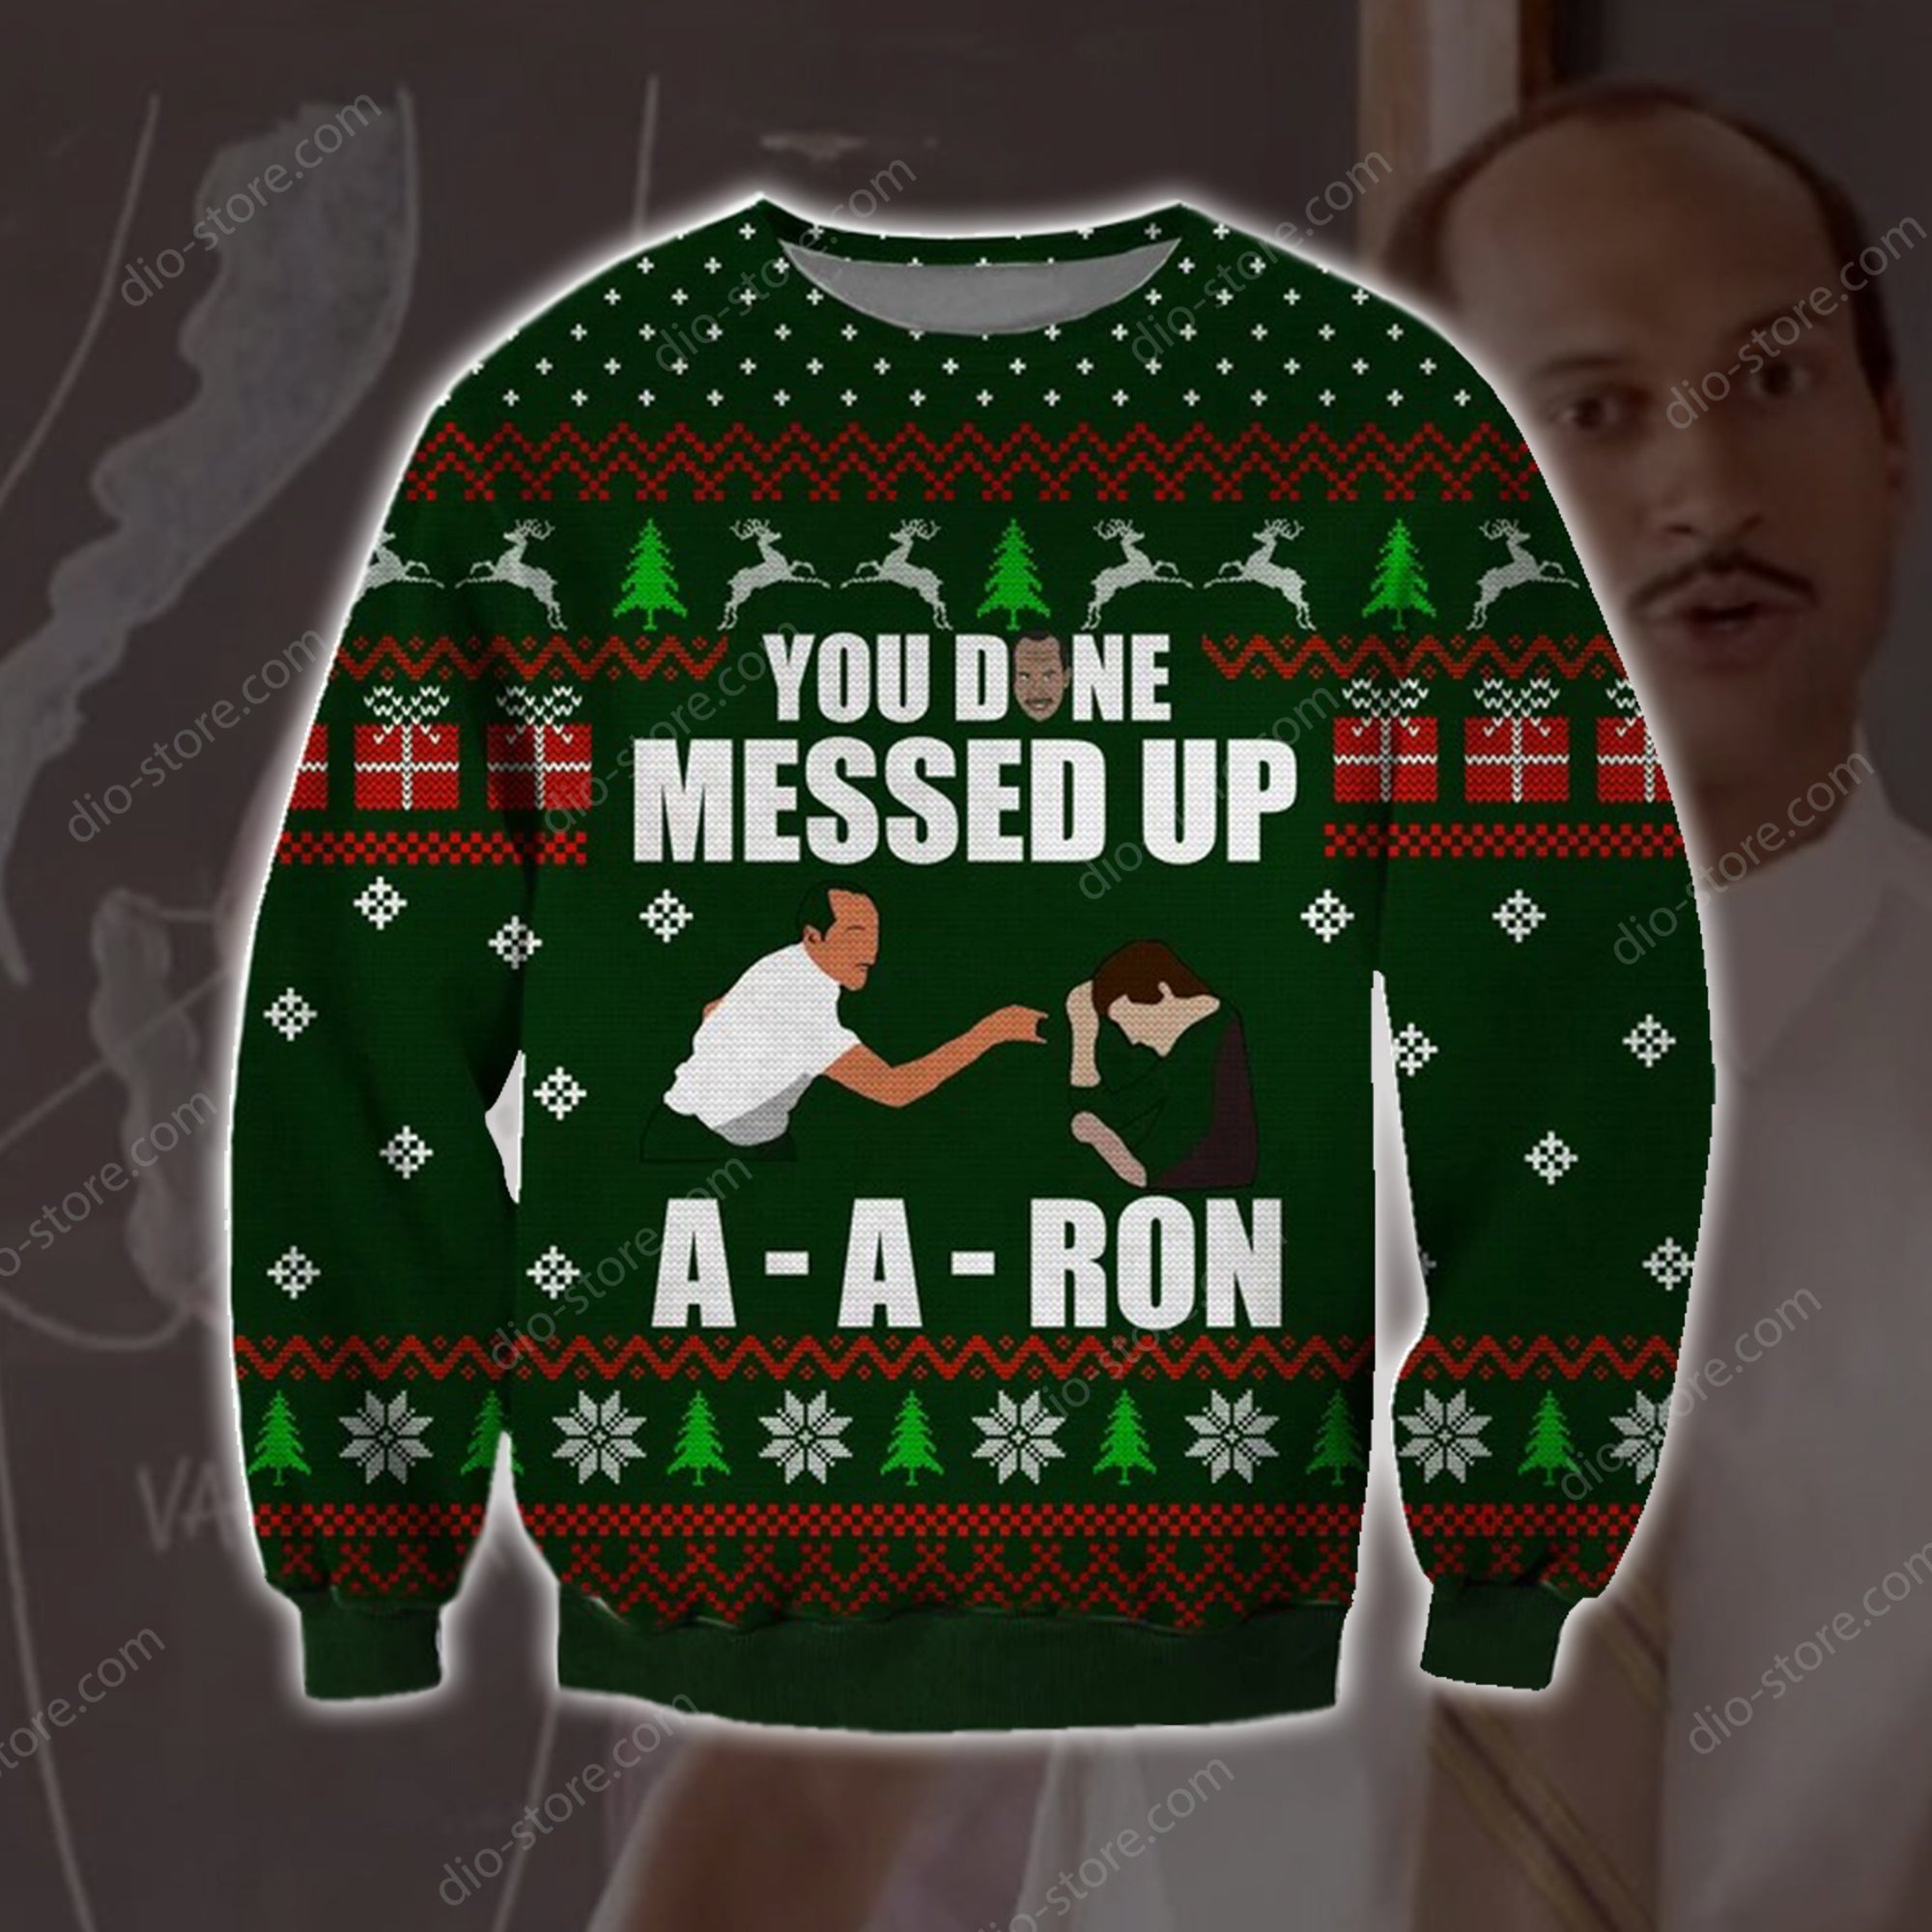 You Done Messed Up A Aron Knitting Pattern 3D Print Ugly Christmas Sweater Hoodie All Over Printed Cint10628